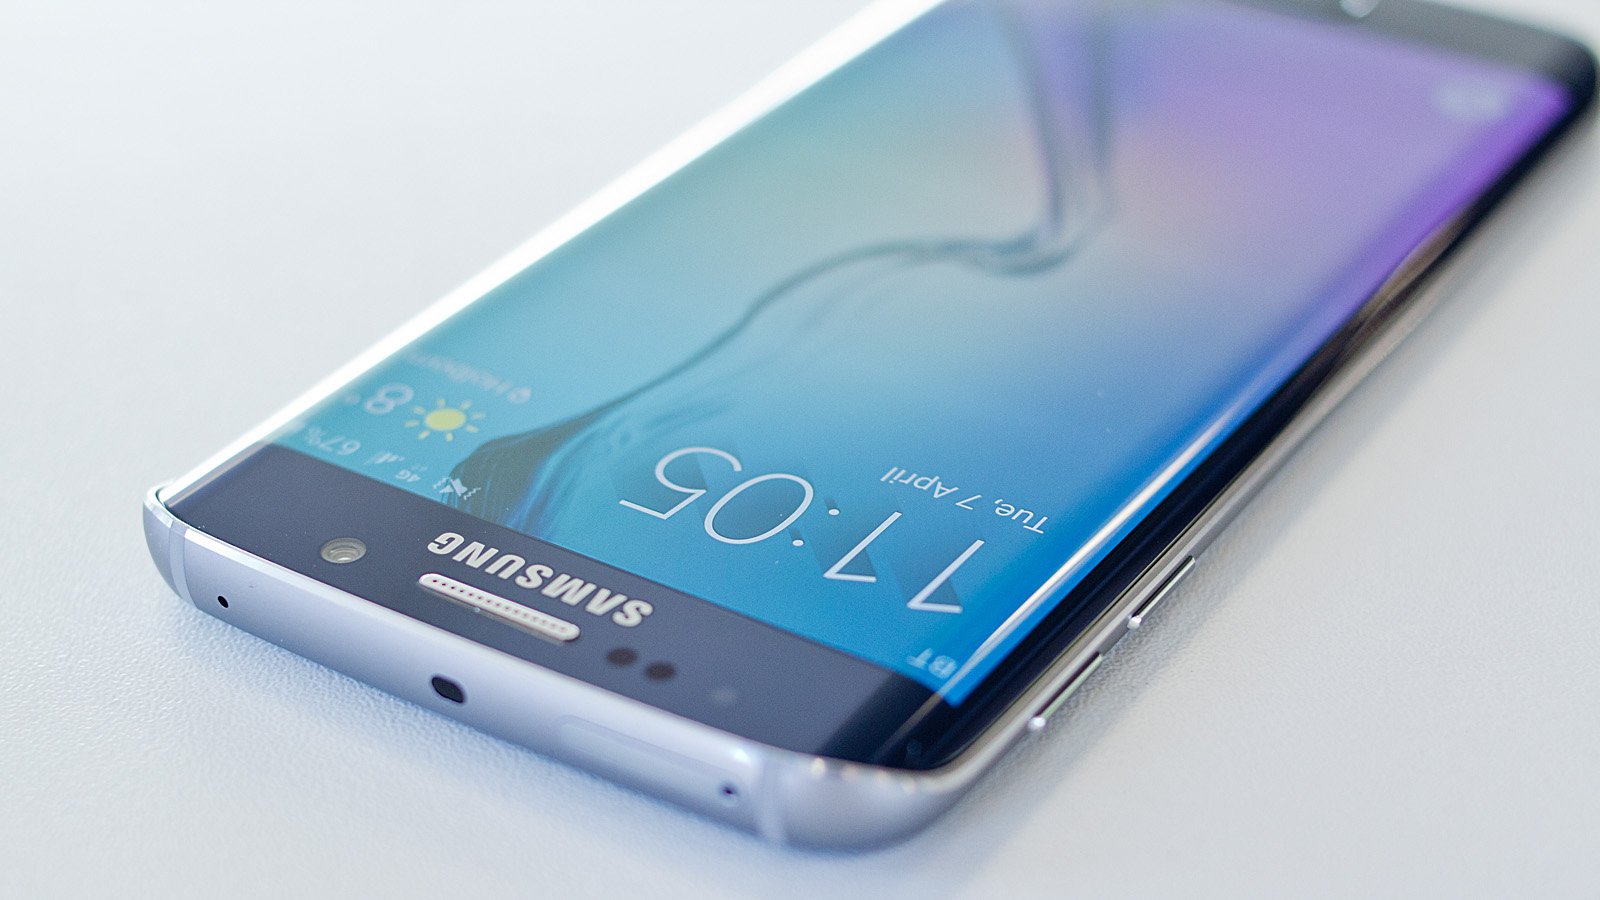 The Samsung Galaxy S7 could be cheaper